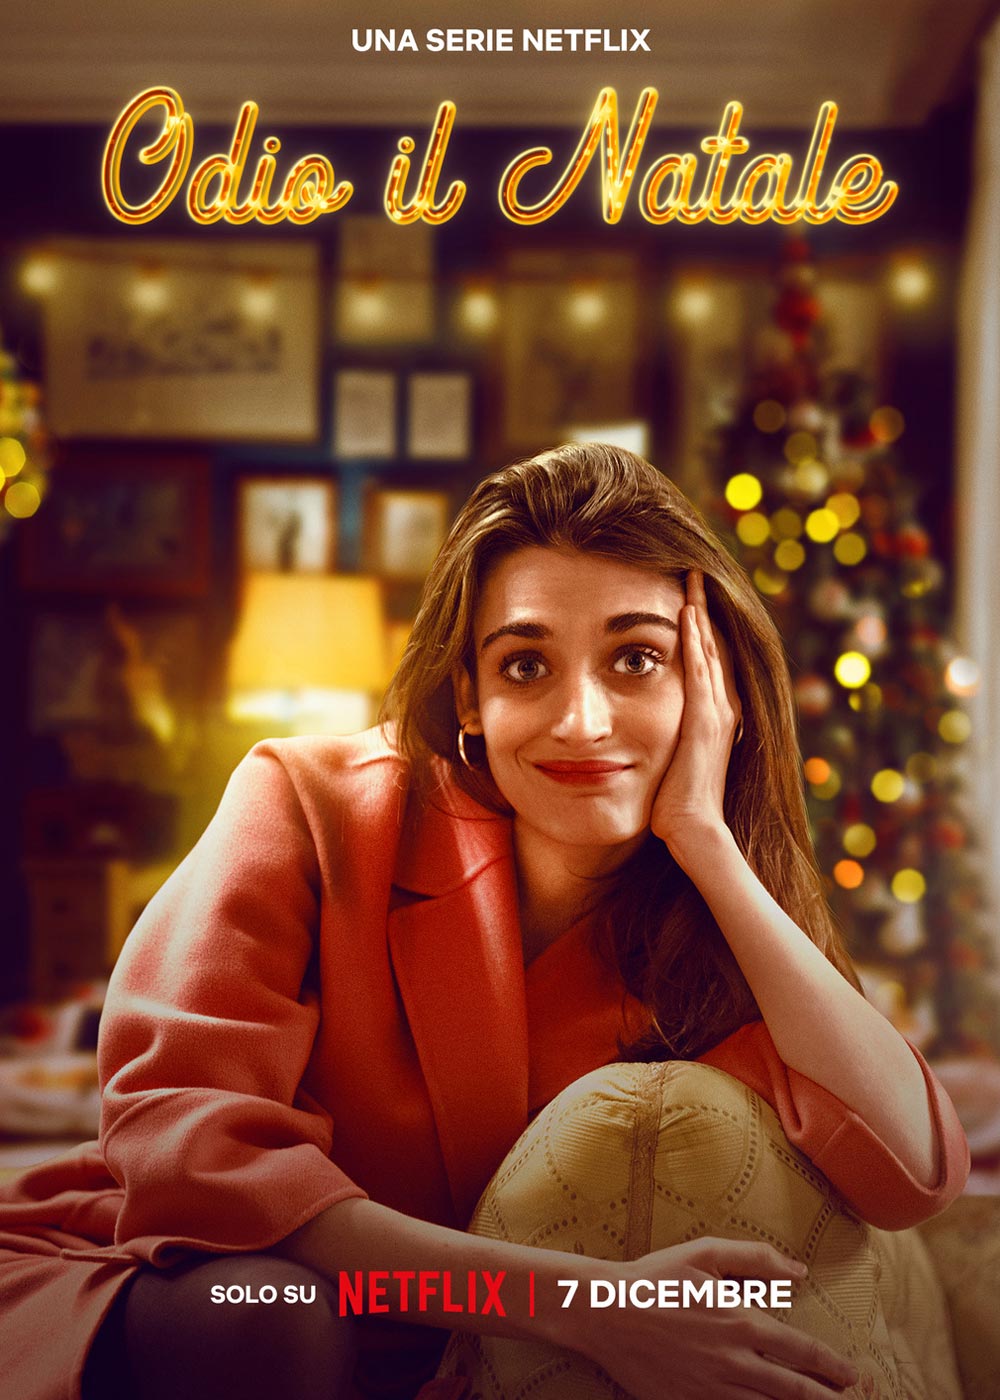 I Hate Christmas (2022) 720p HEVC HDRip S01 Complete NF Series [Dual Audio] [Hindi or English] Download